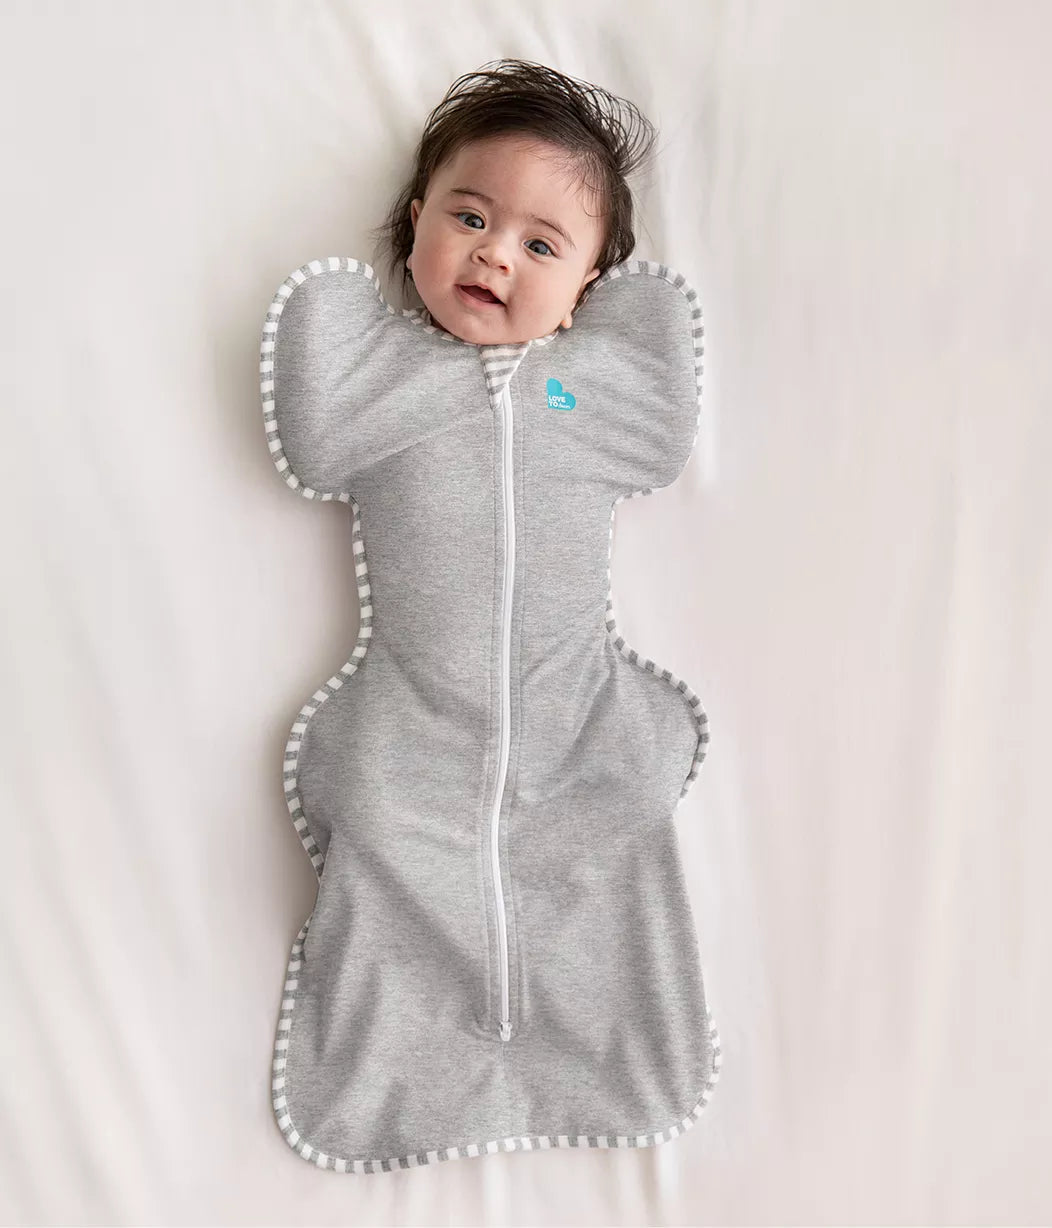 Baby wearing Love to Dream Swaddle Up Original Swaddler - Gray